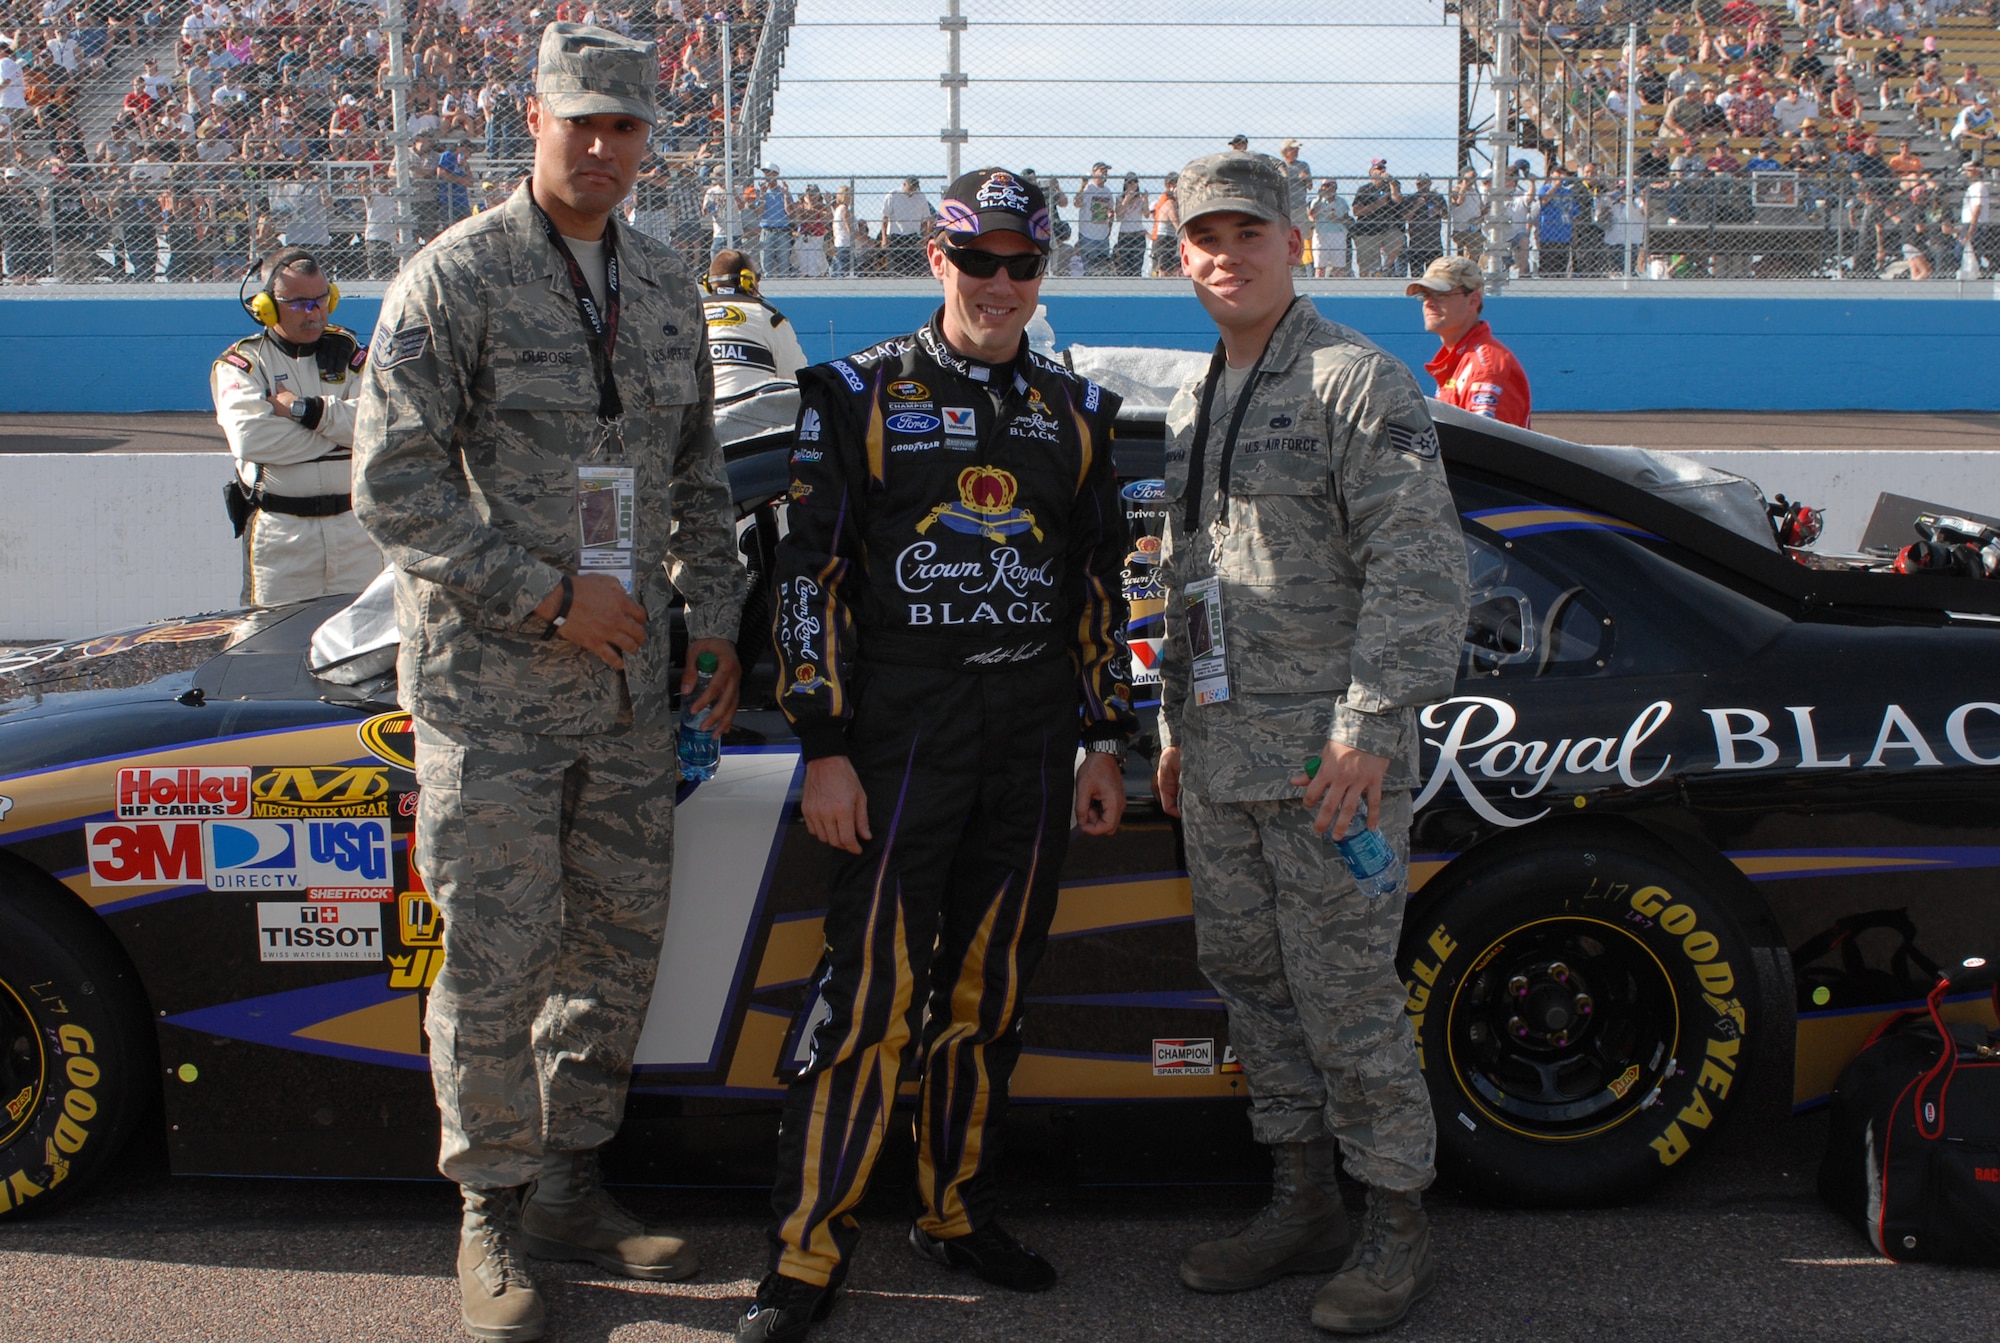 Staff Sgts. Damon Thurman (right) and Charlton Dubose, 56th Maintenance Group quality assurance inspectors, pose with Matt Kenseth, NASCAR driver Saturday, April 10 during the Subway Fresh Fit 600 NASCAR race at the Phoenix International Raceway. (Photo by Airman 1st Class Sandra Welch)